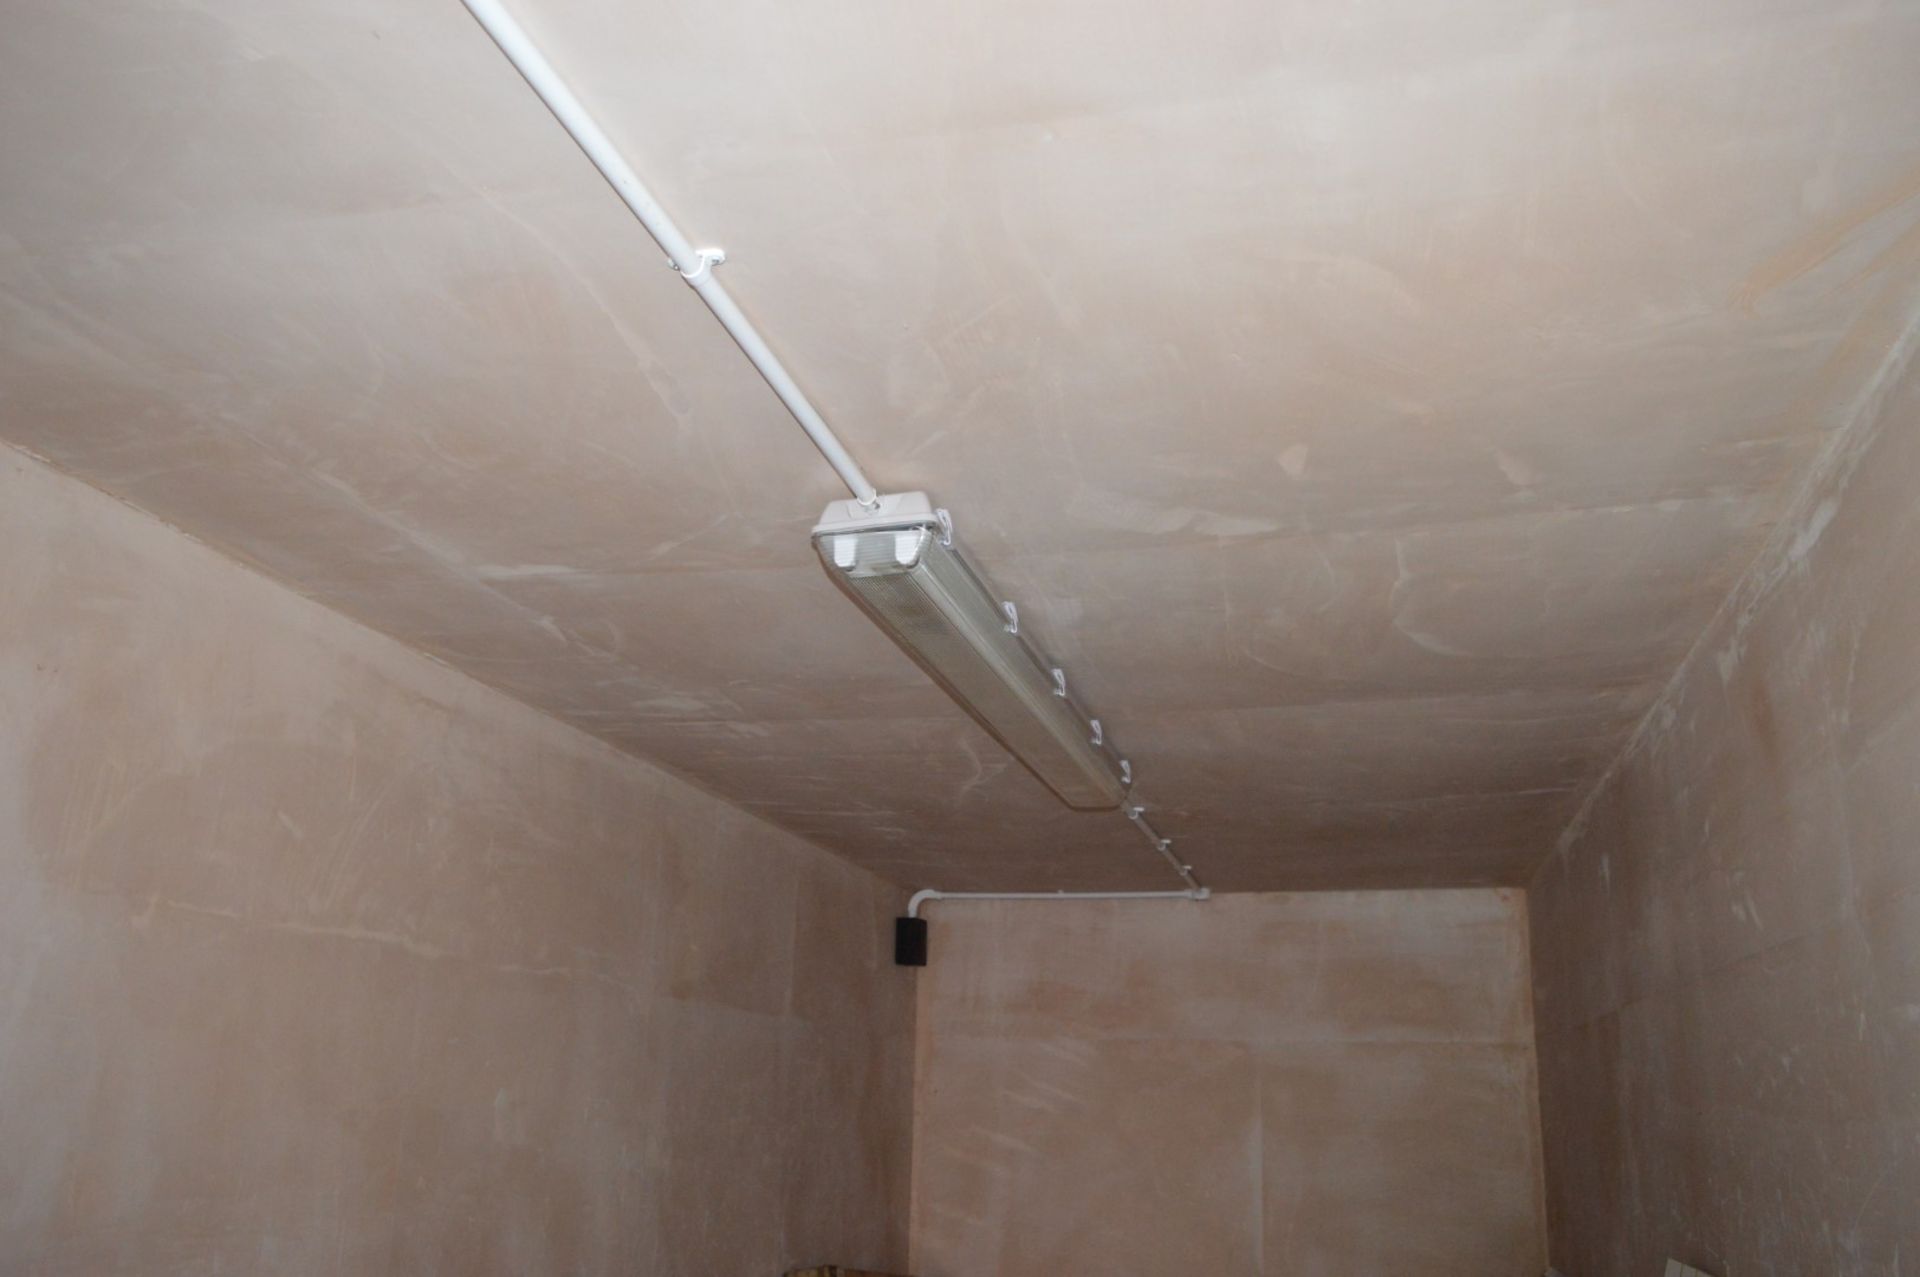 1 x Commercial 20ft Shipping / Storage Container - Internally Plastered With Light Fitting - H256 - Image 4 of 8